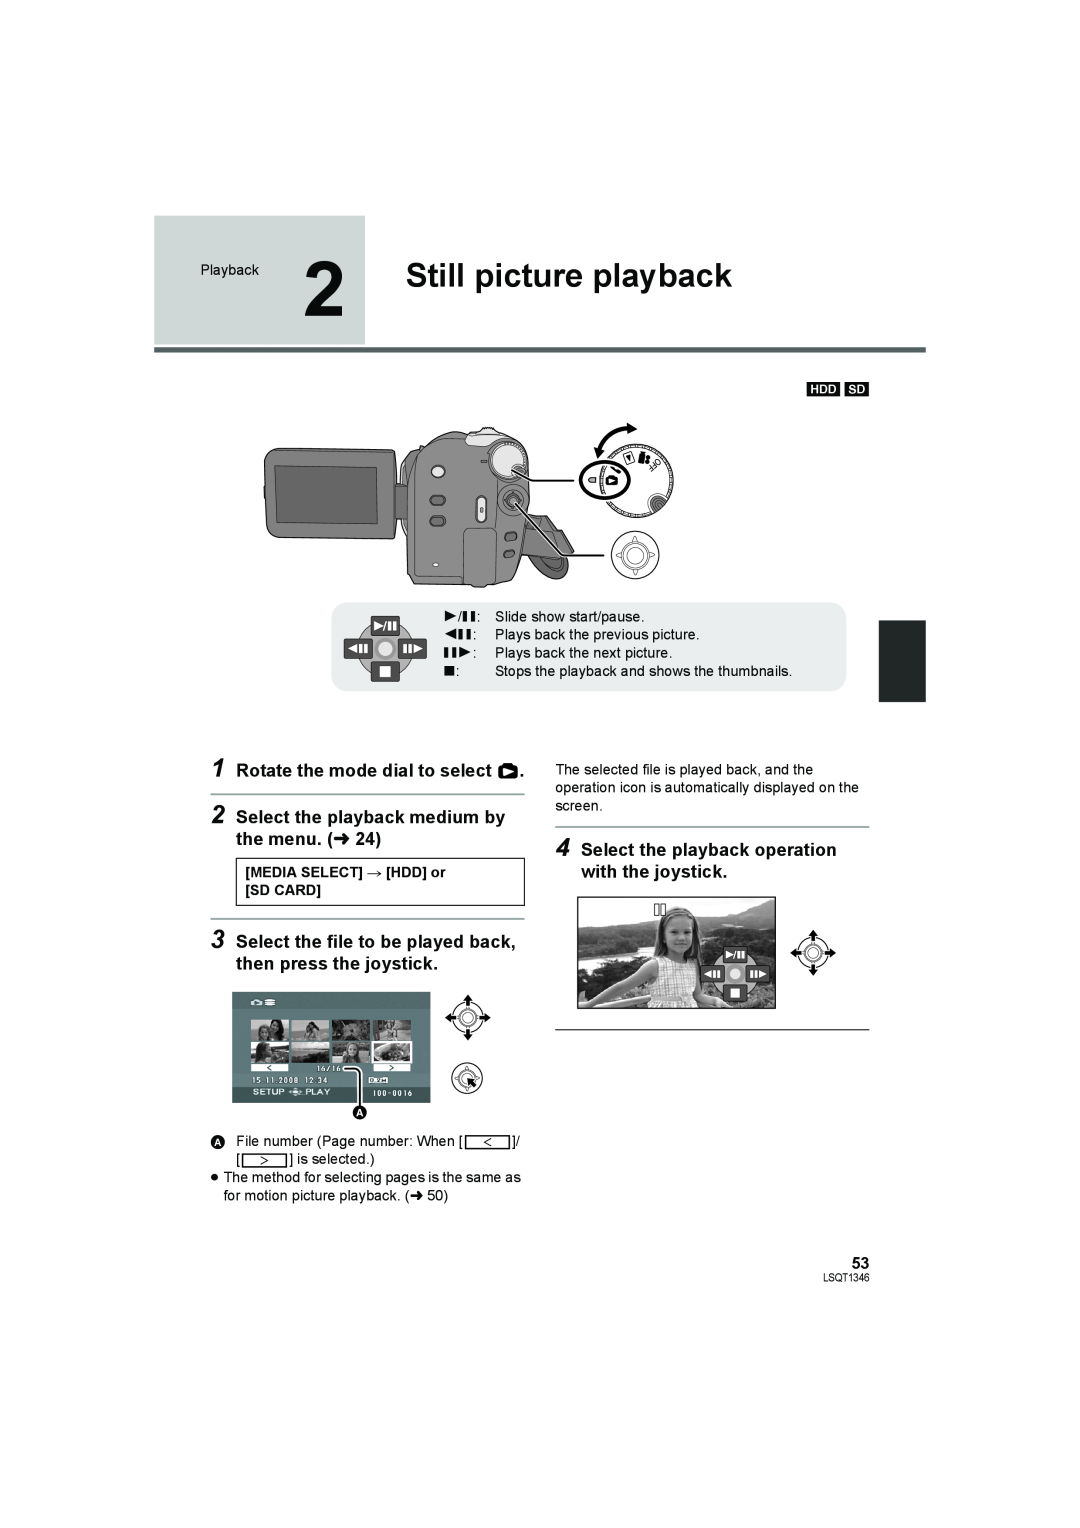 Panasonic SDR-H50 operating instructions Still picture playback, Select the file to be played back, then press the joystick 